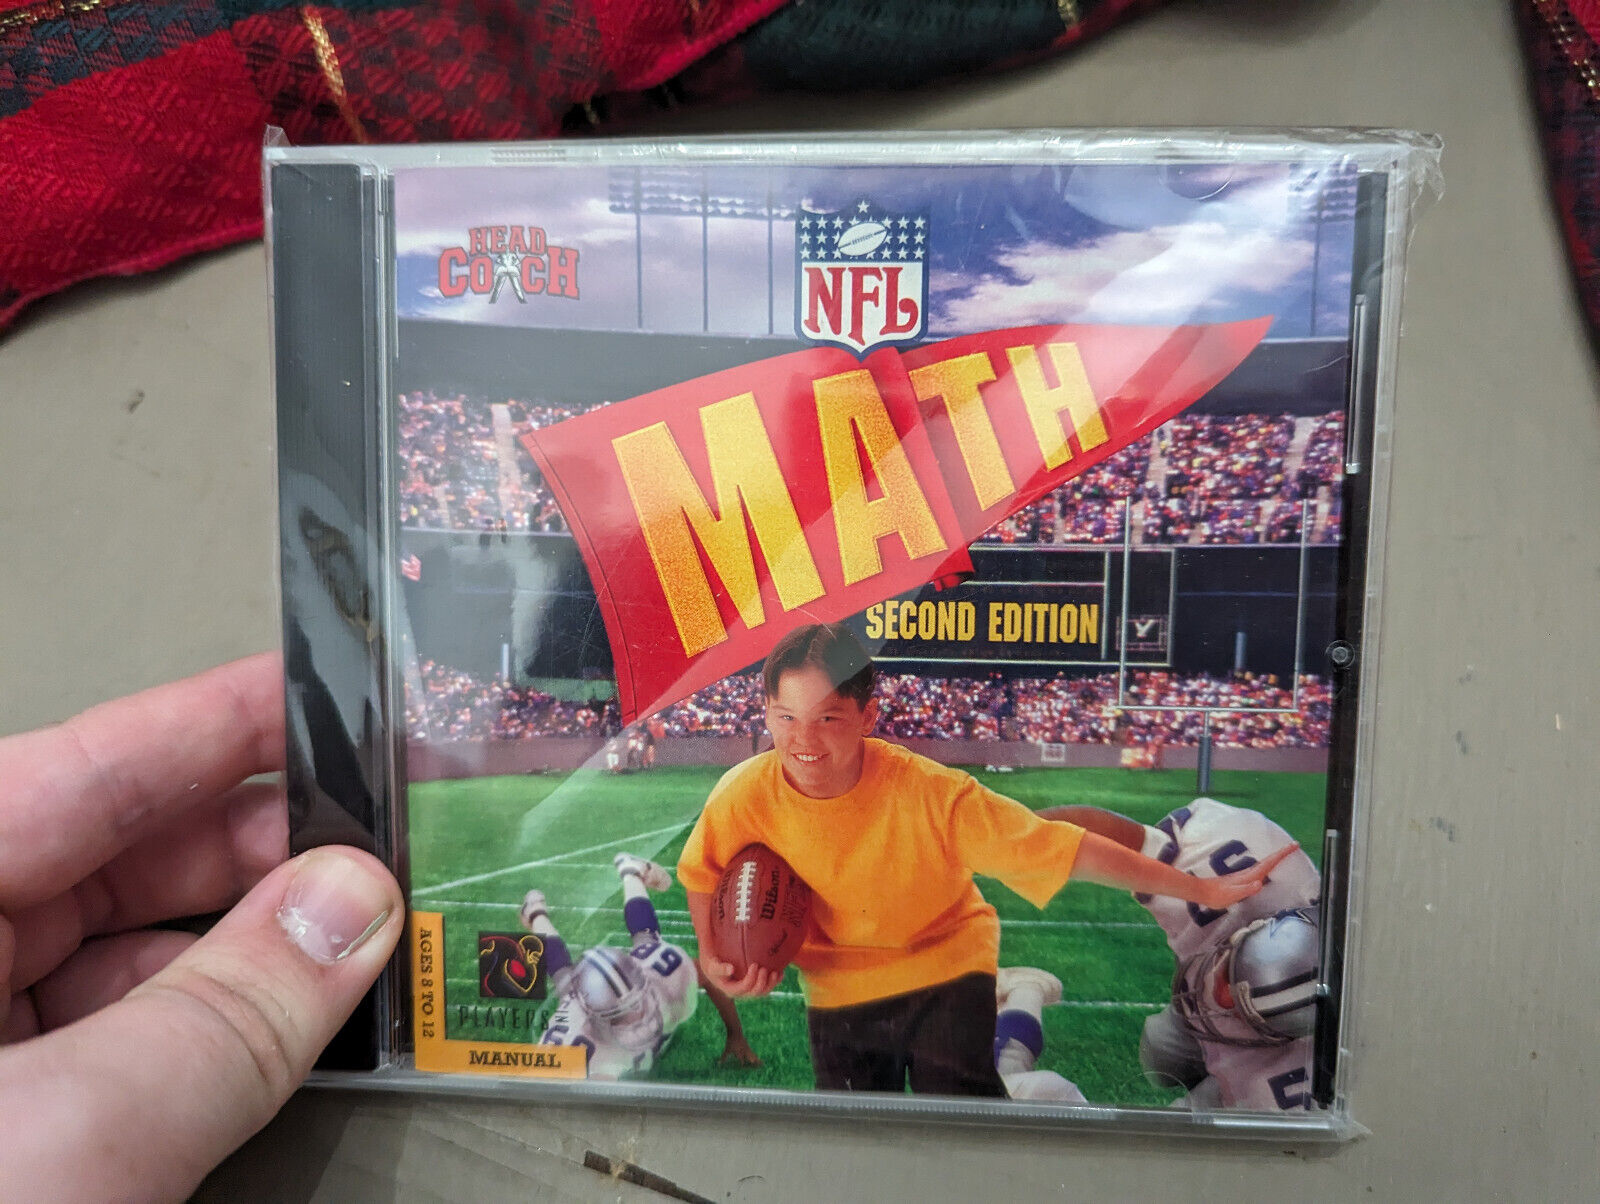 NFL Math Second Edition Head Coach 1996 PC MAC CD-ROM Software Game WIN 95